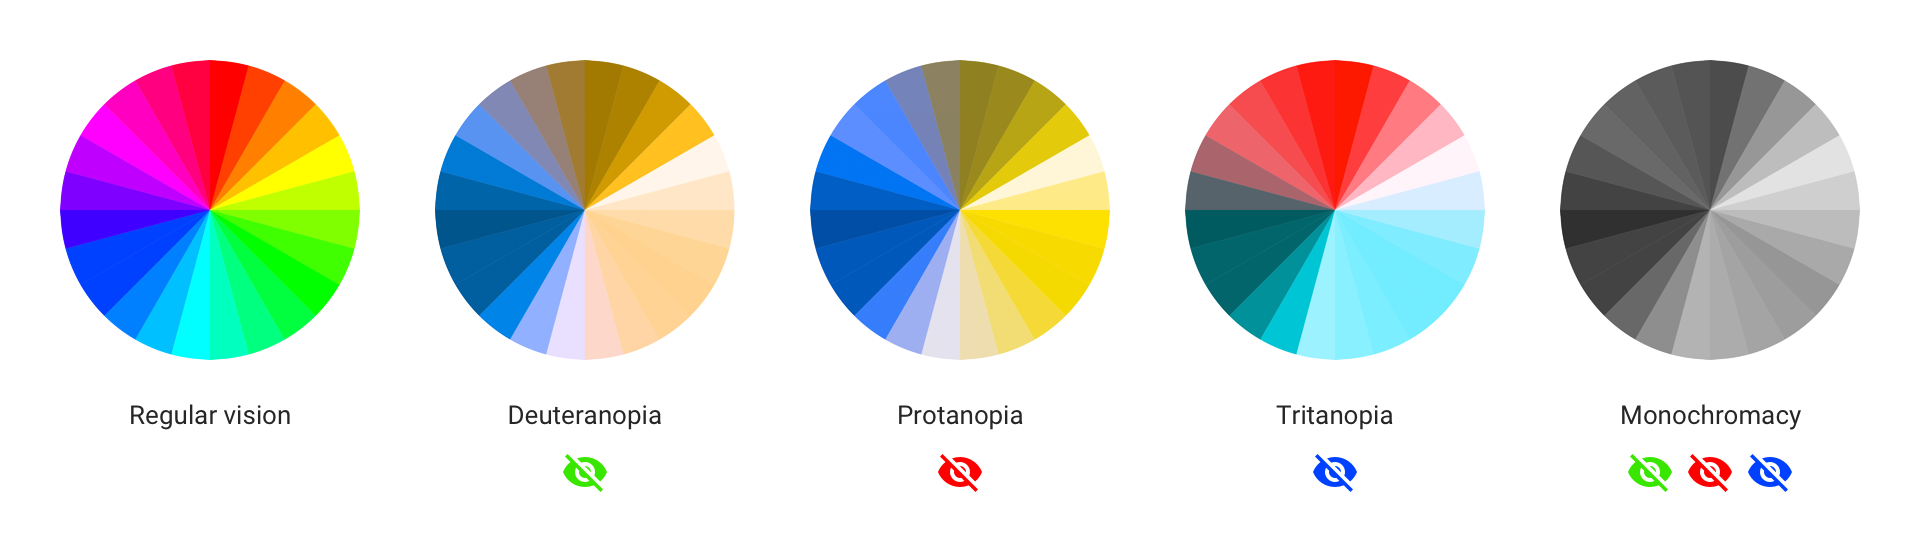 five colour wheels representing regular vision, deuteranopia, protanopia, tritanopia and monochromacy with indicators for which colours are missing for each wheel